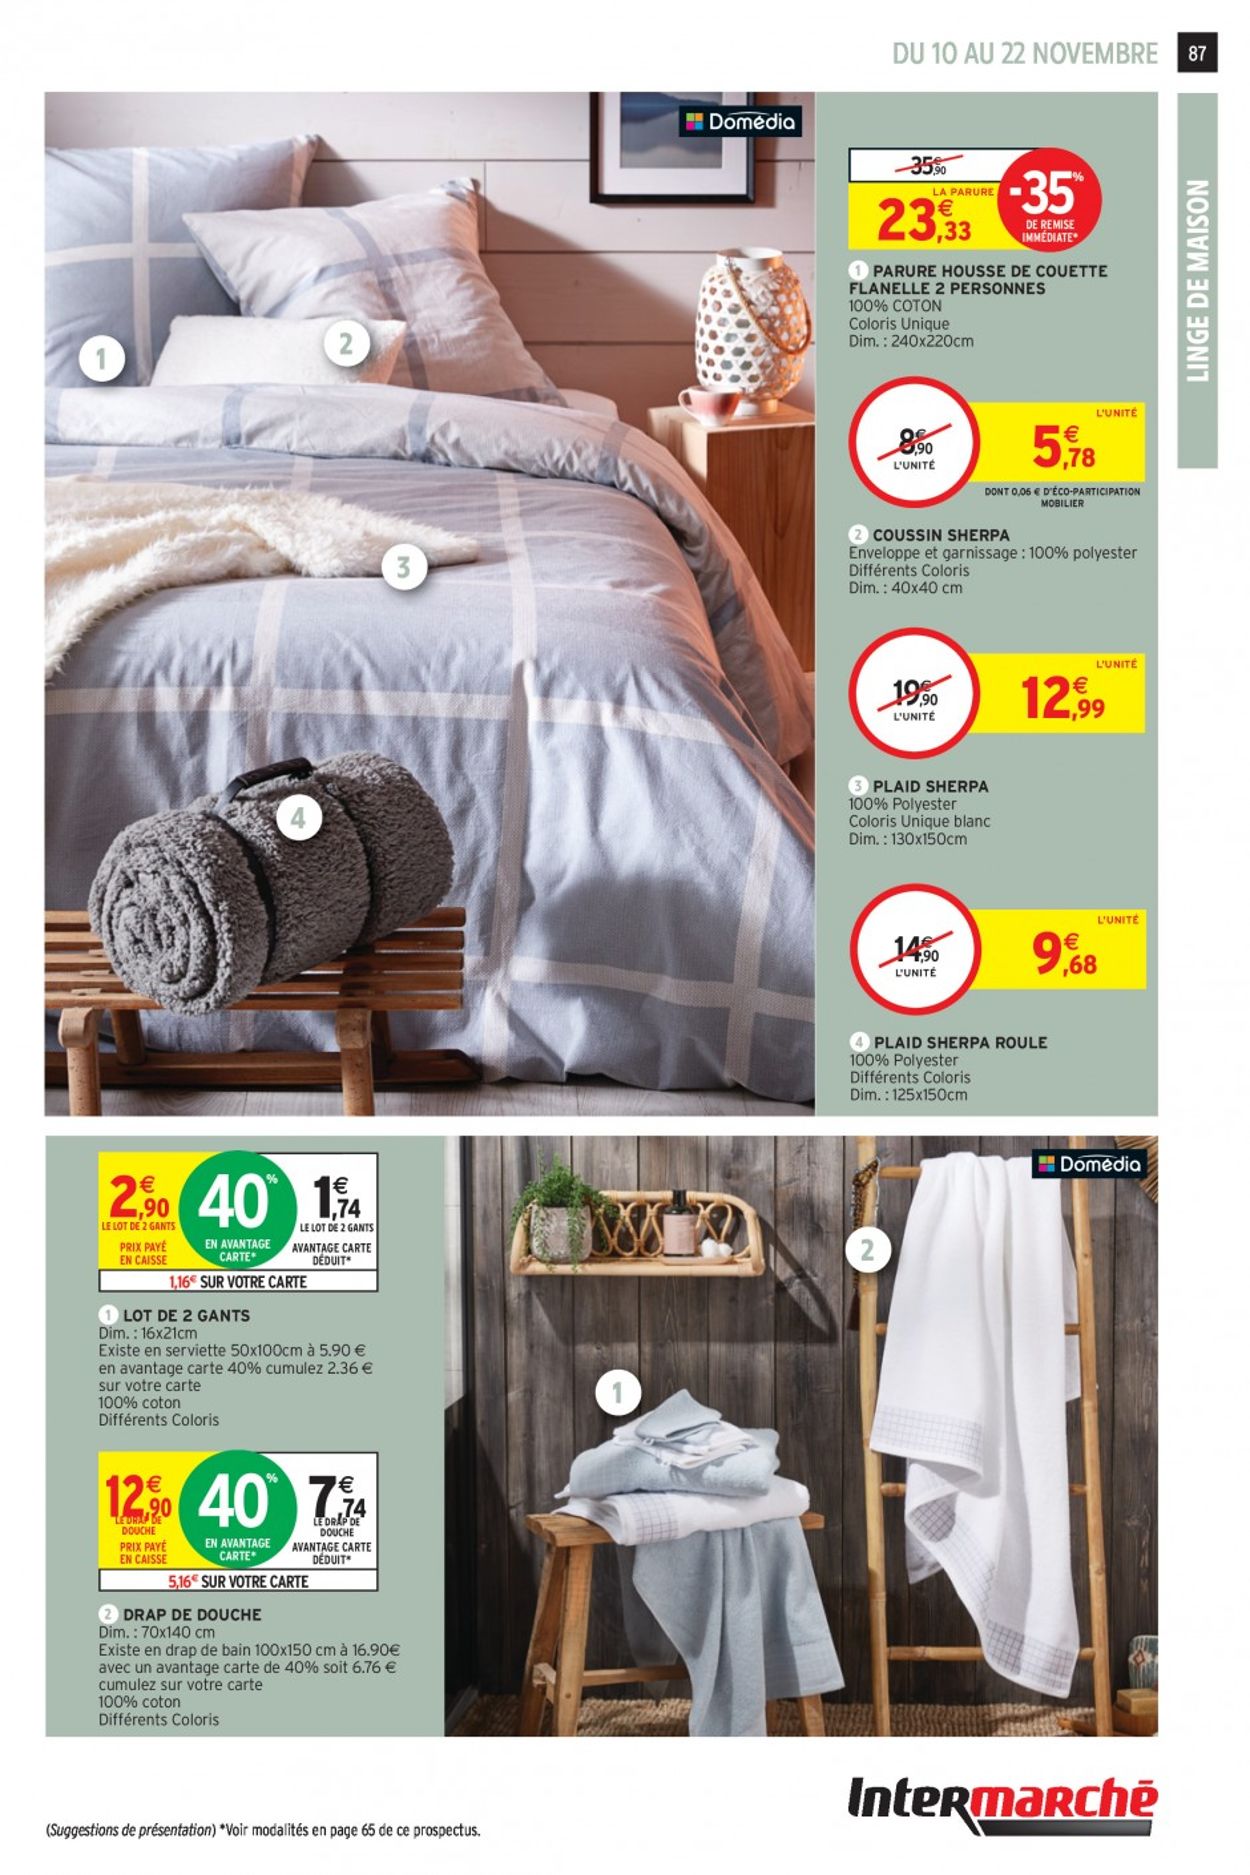 Intermarché Black Friday 2020 Catalogue - 10.11-22.11.2020 (Page 87)